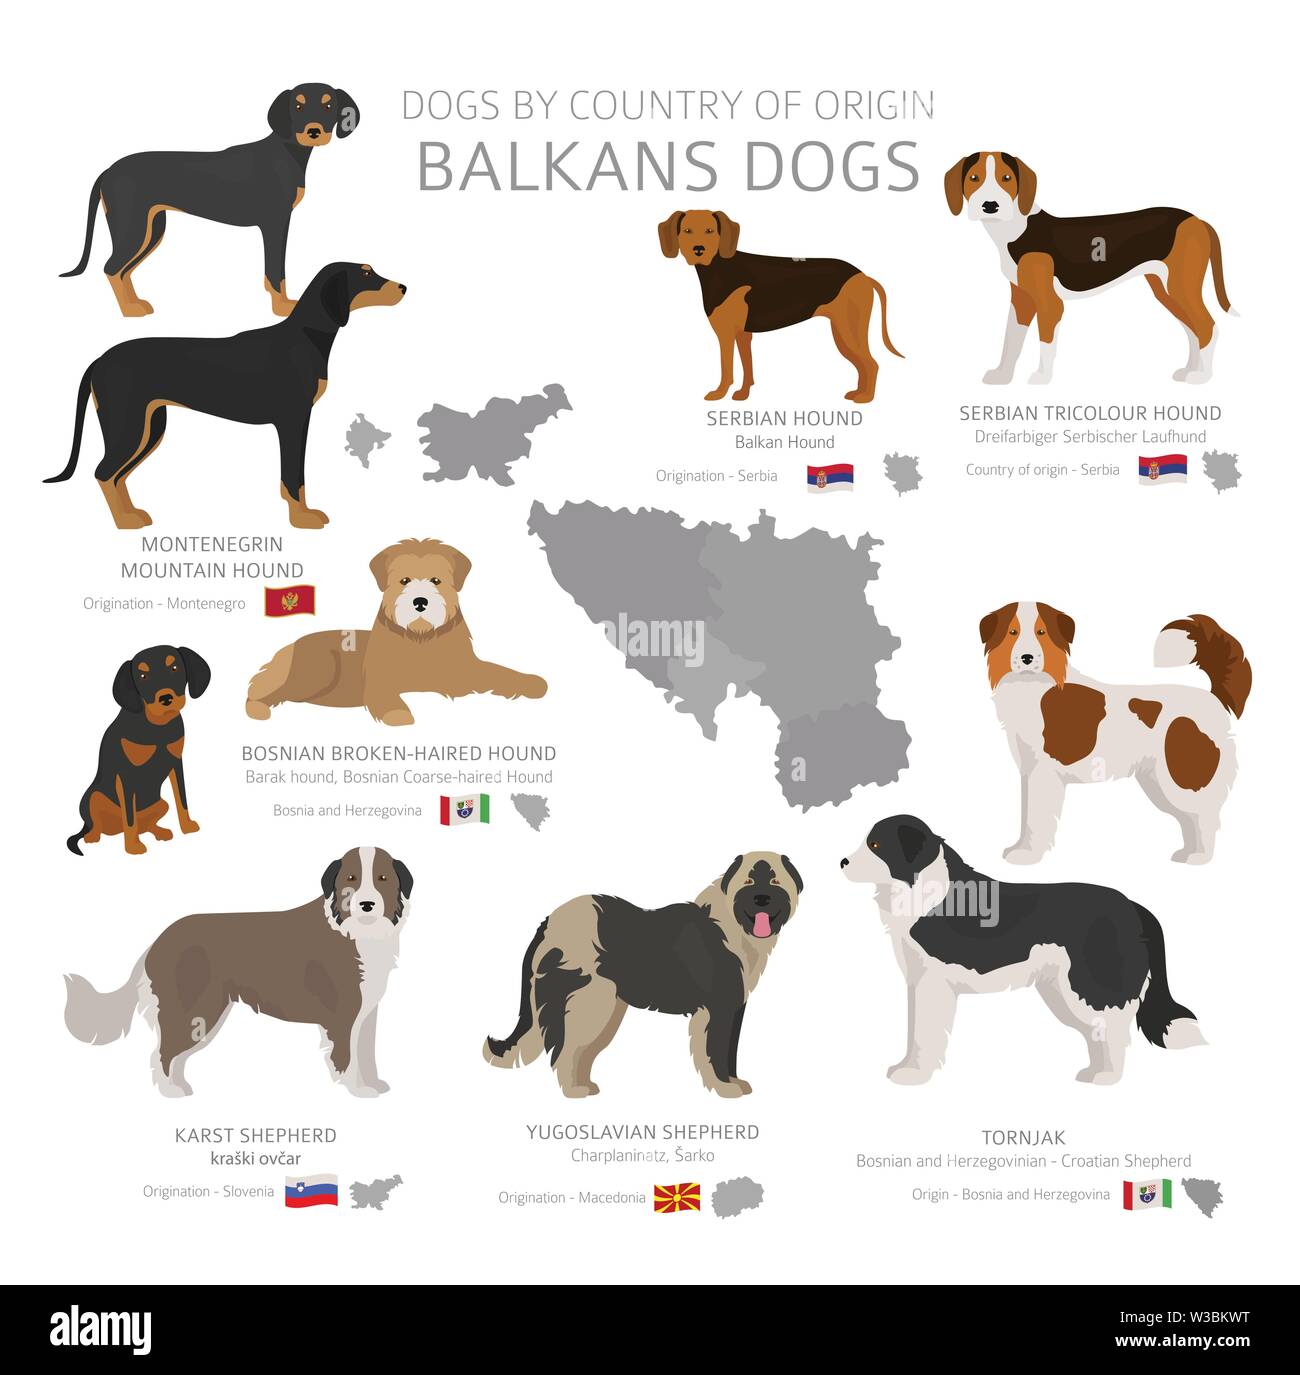 are serbian hounds good guard dogs